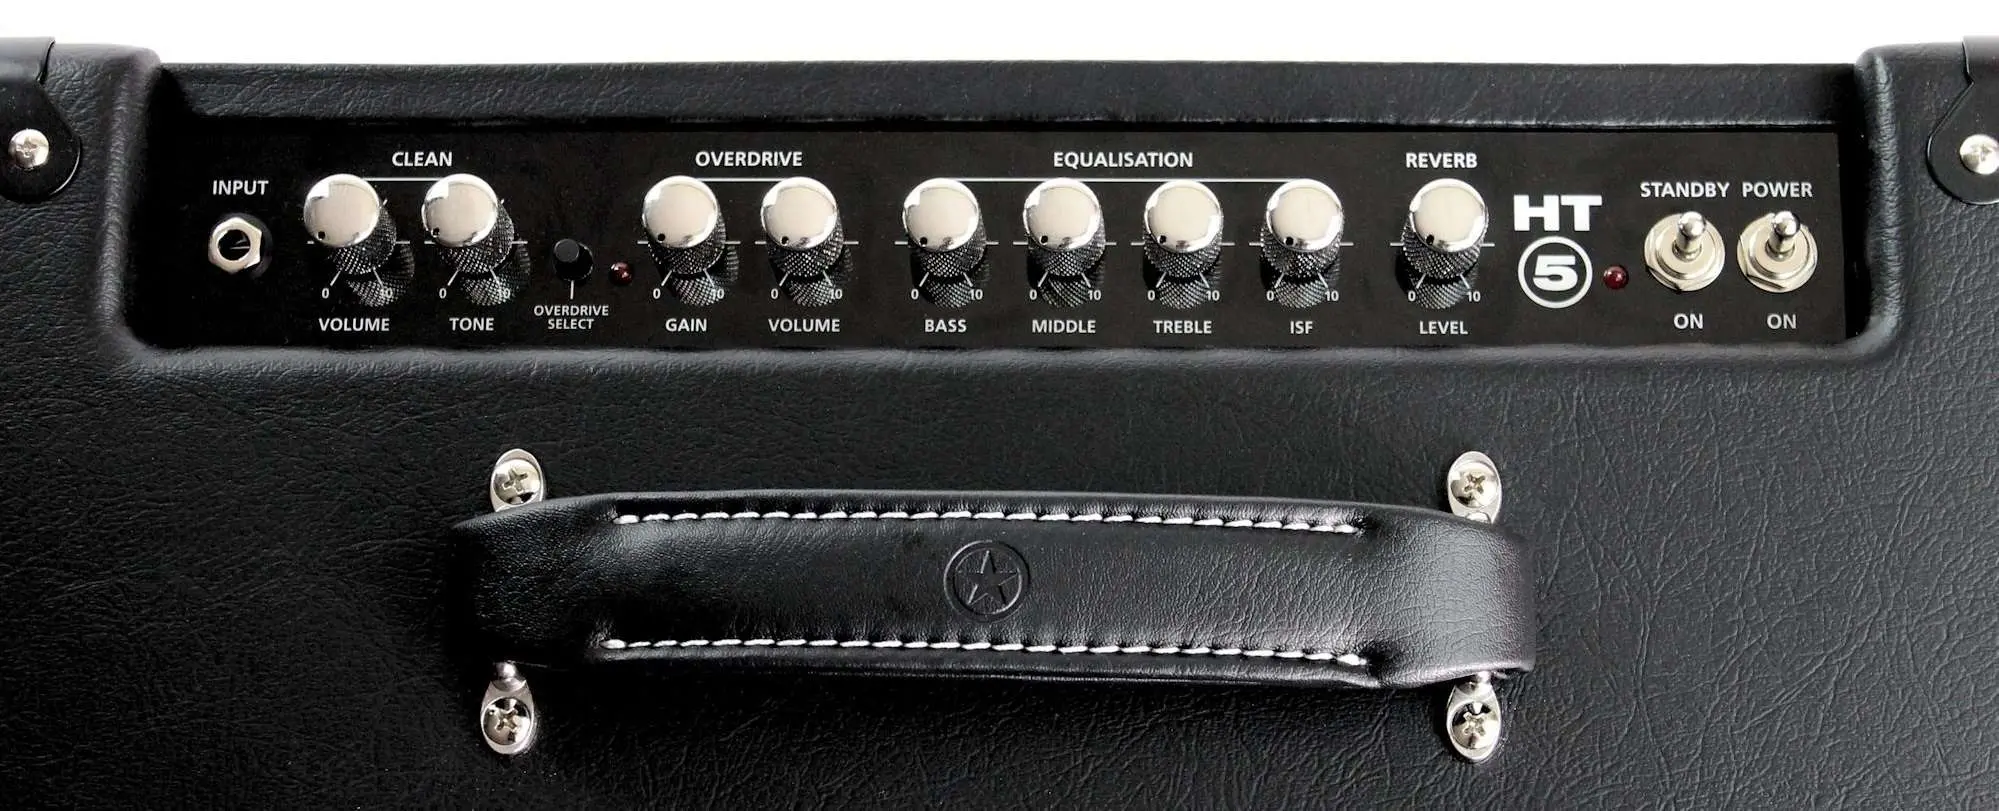 Blackstar HT-5R is powered by one 12AX7 preamp tube and one 12BH7 power tube. 